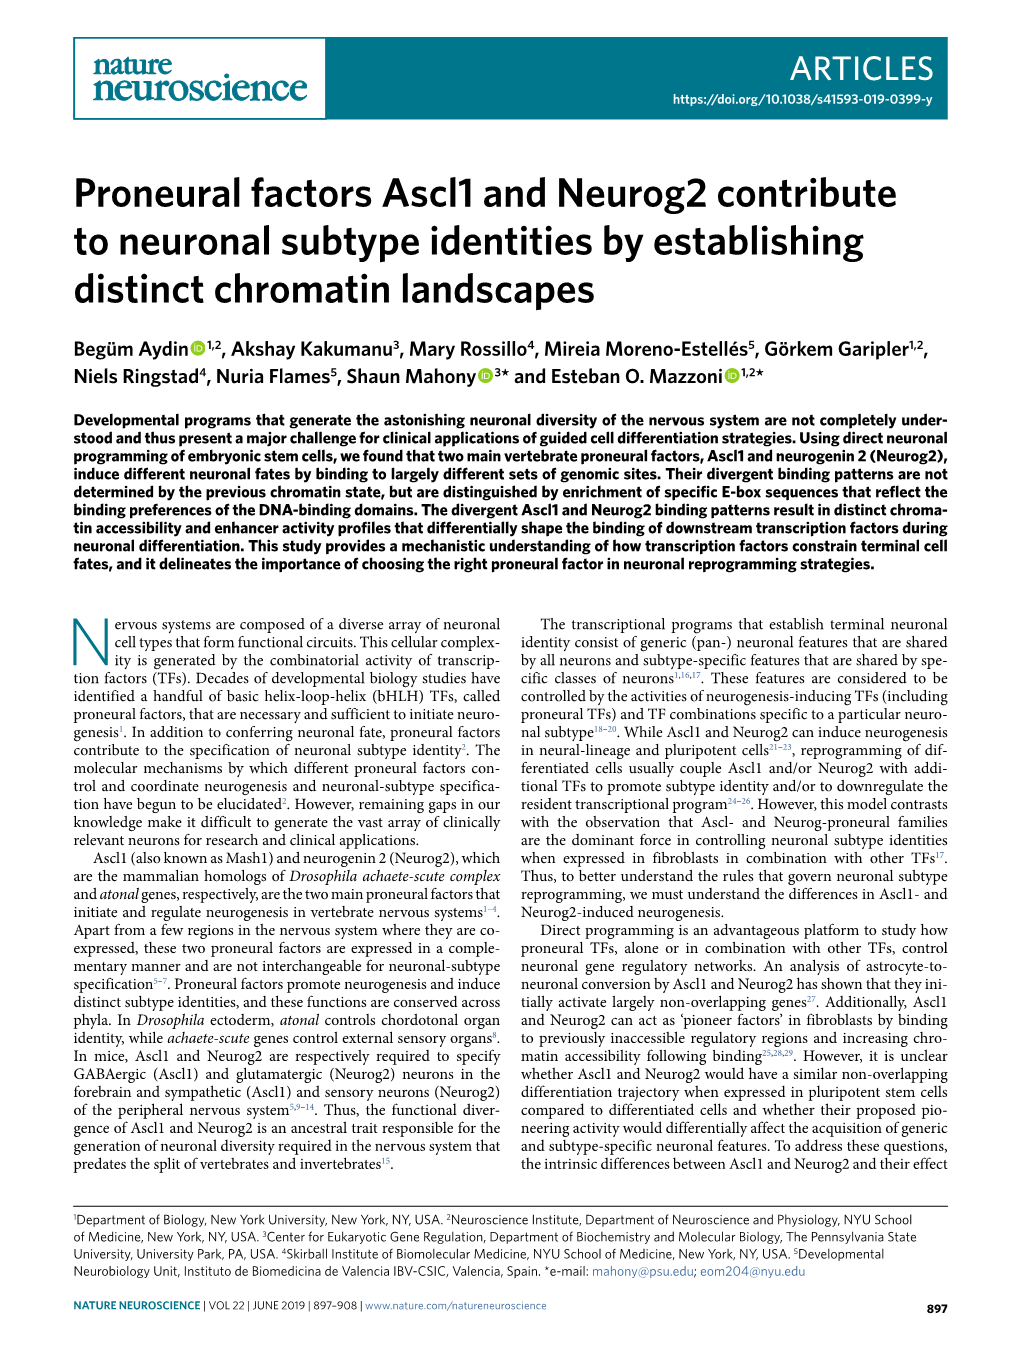 Proneural Factors Ascl1 and Neurog2 Contribute to Neuronal Subtype Identities by Establishing Distinct Chromatin Landscapes